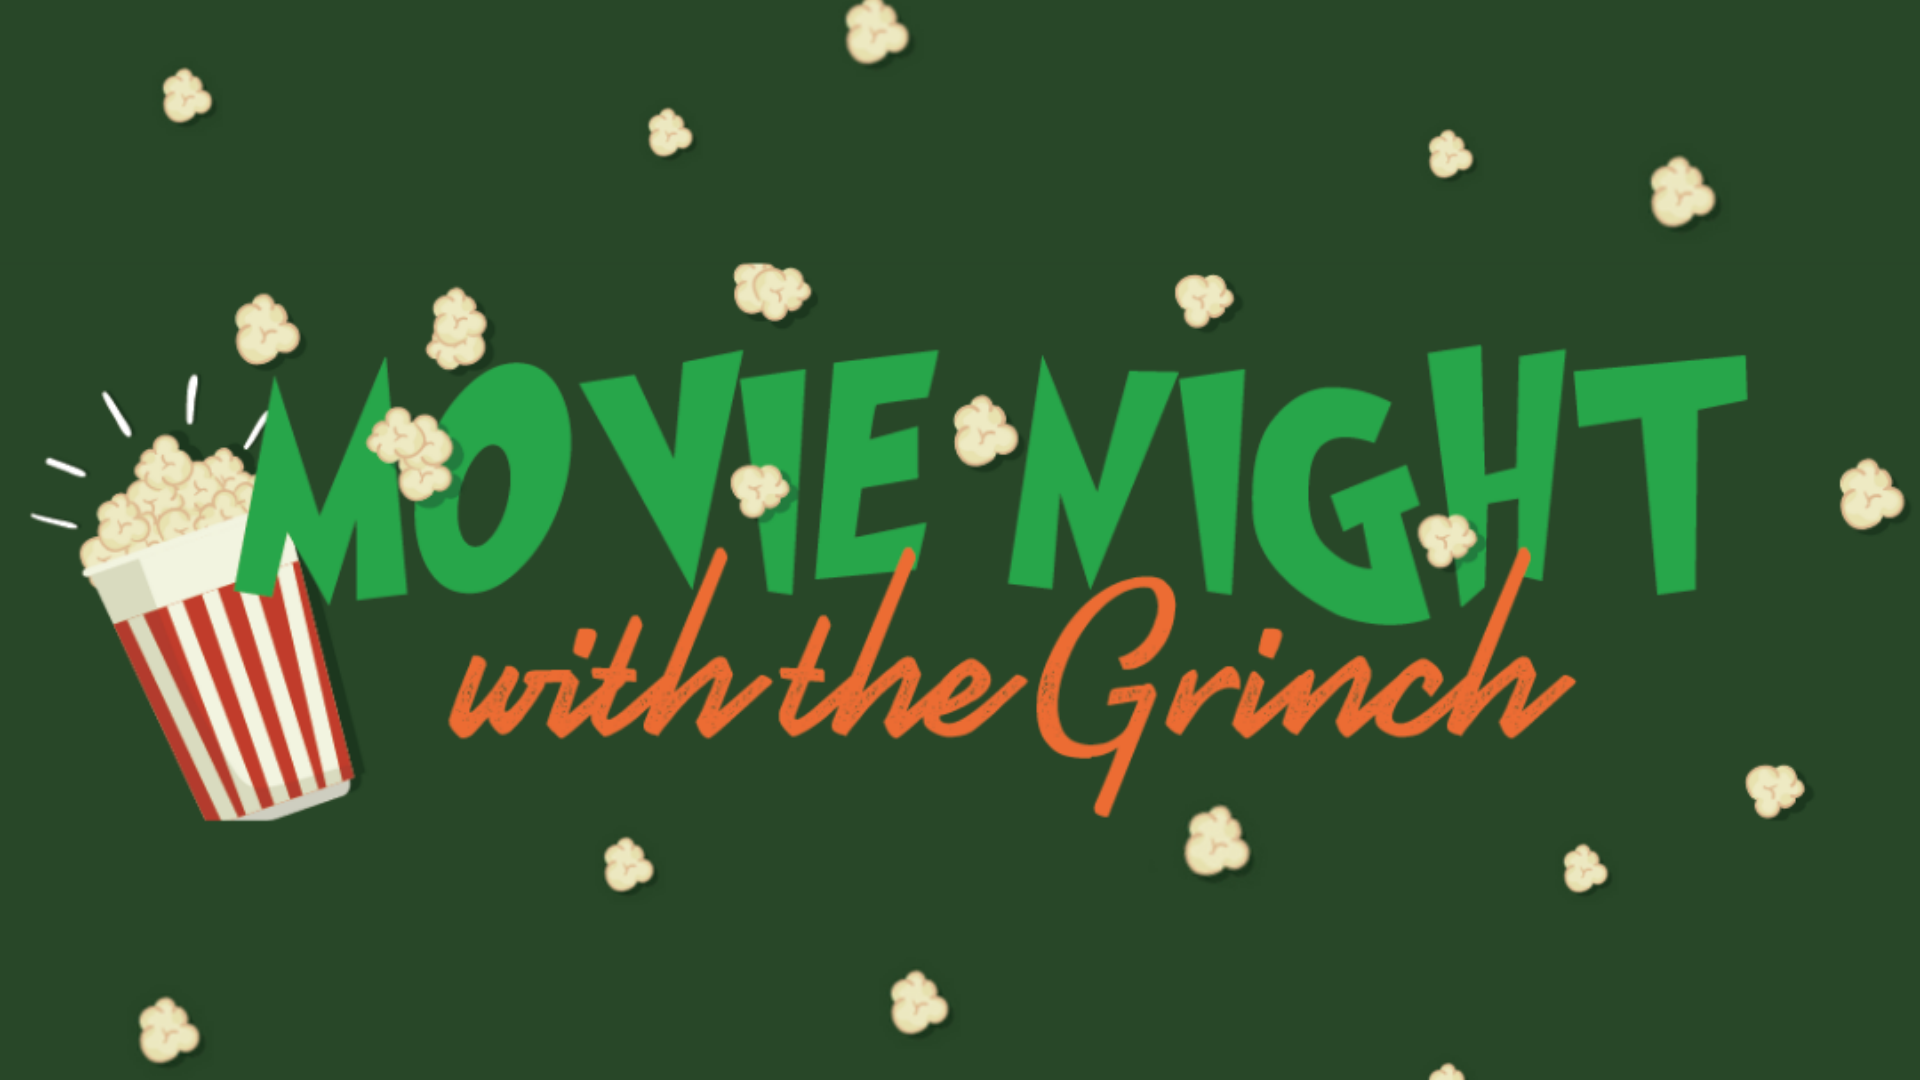 movie night with the grinch event graphic with popcorn